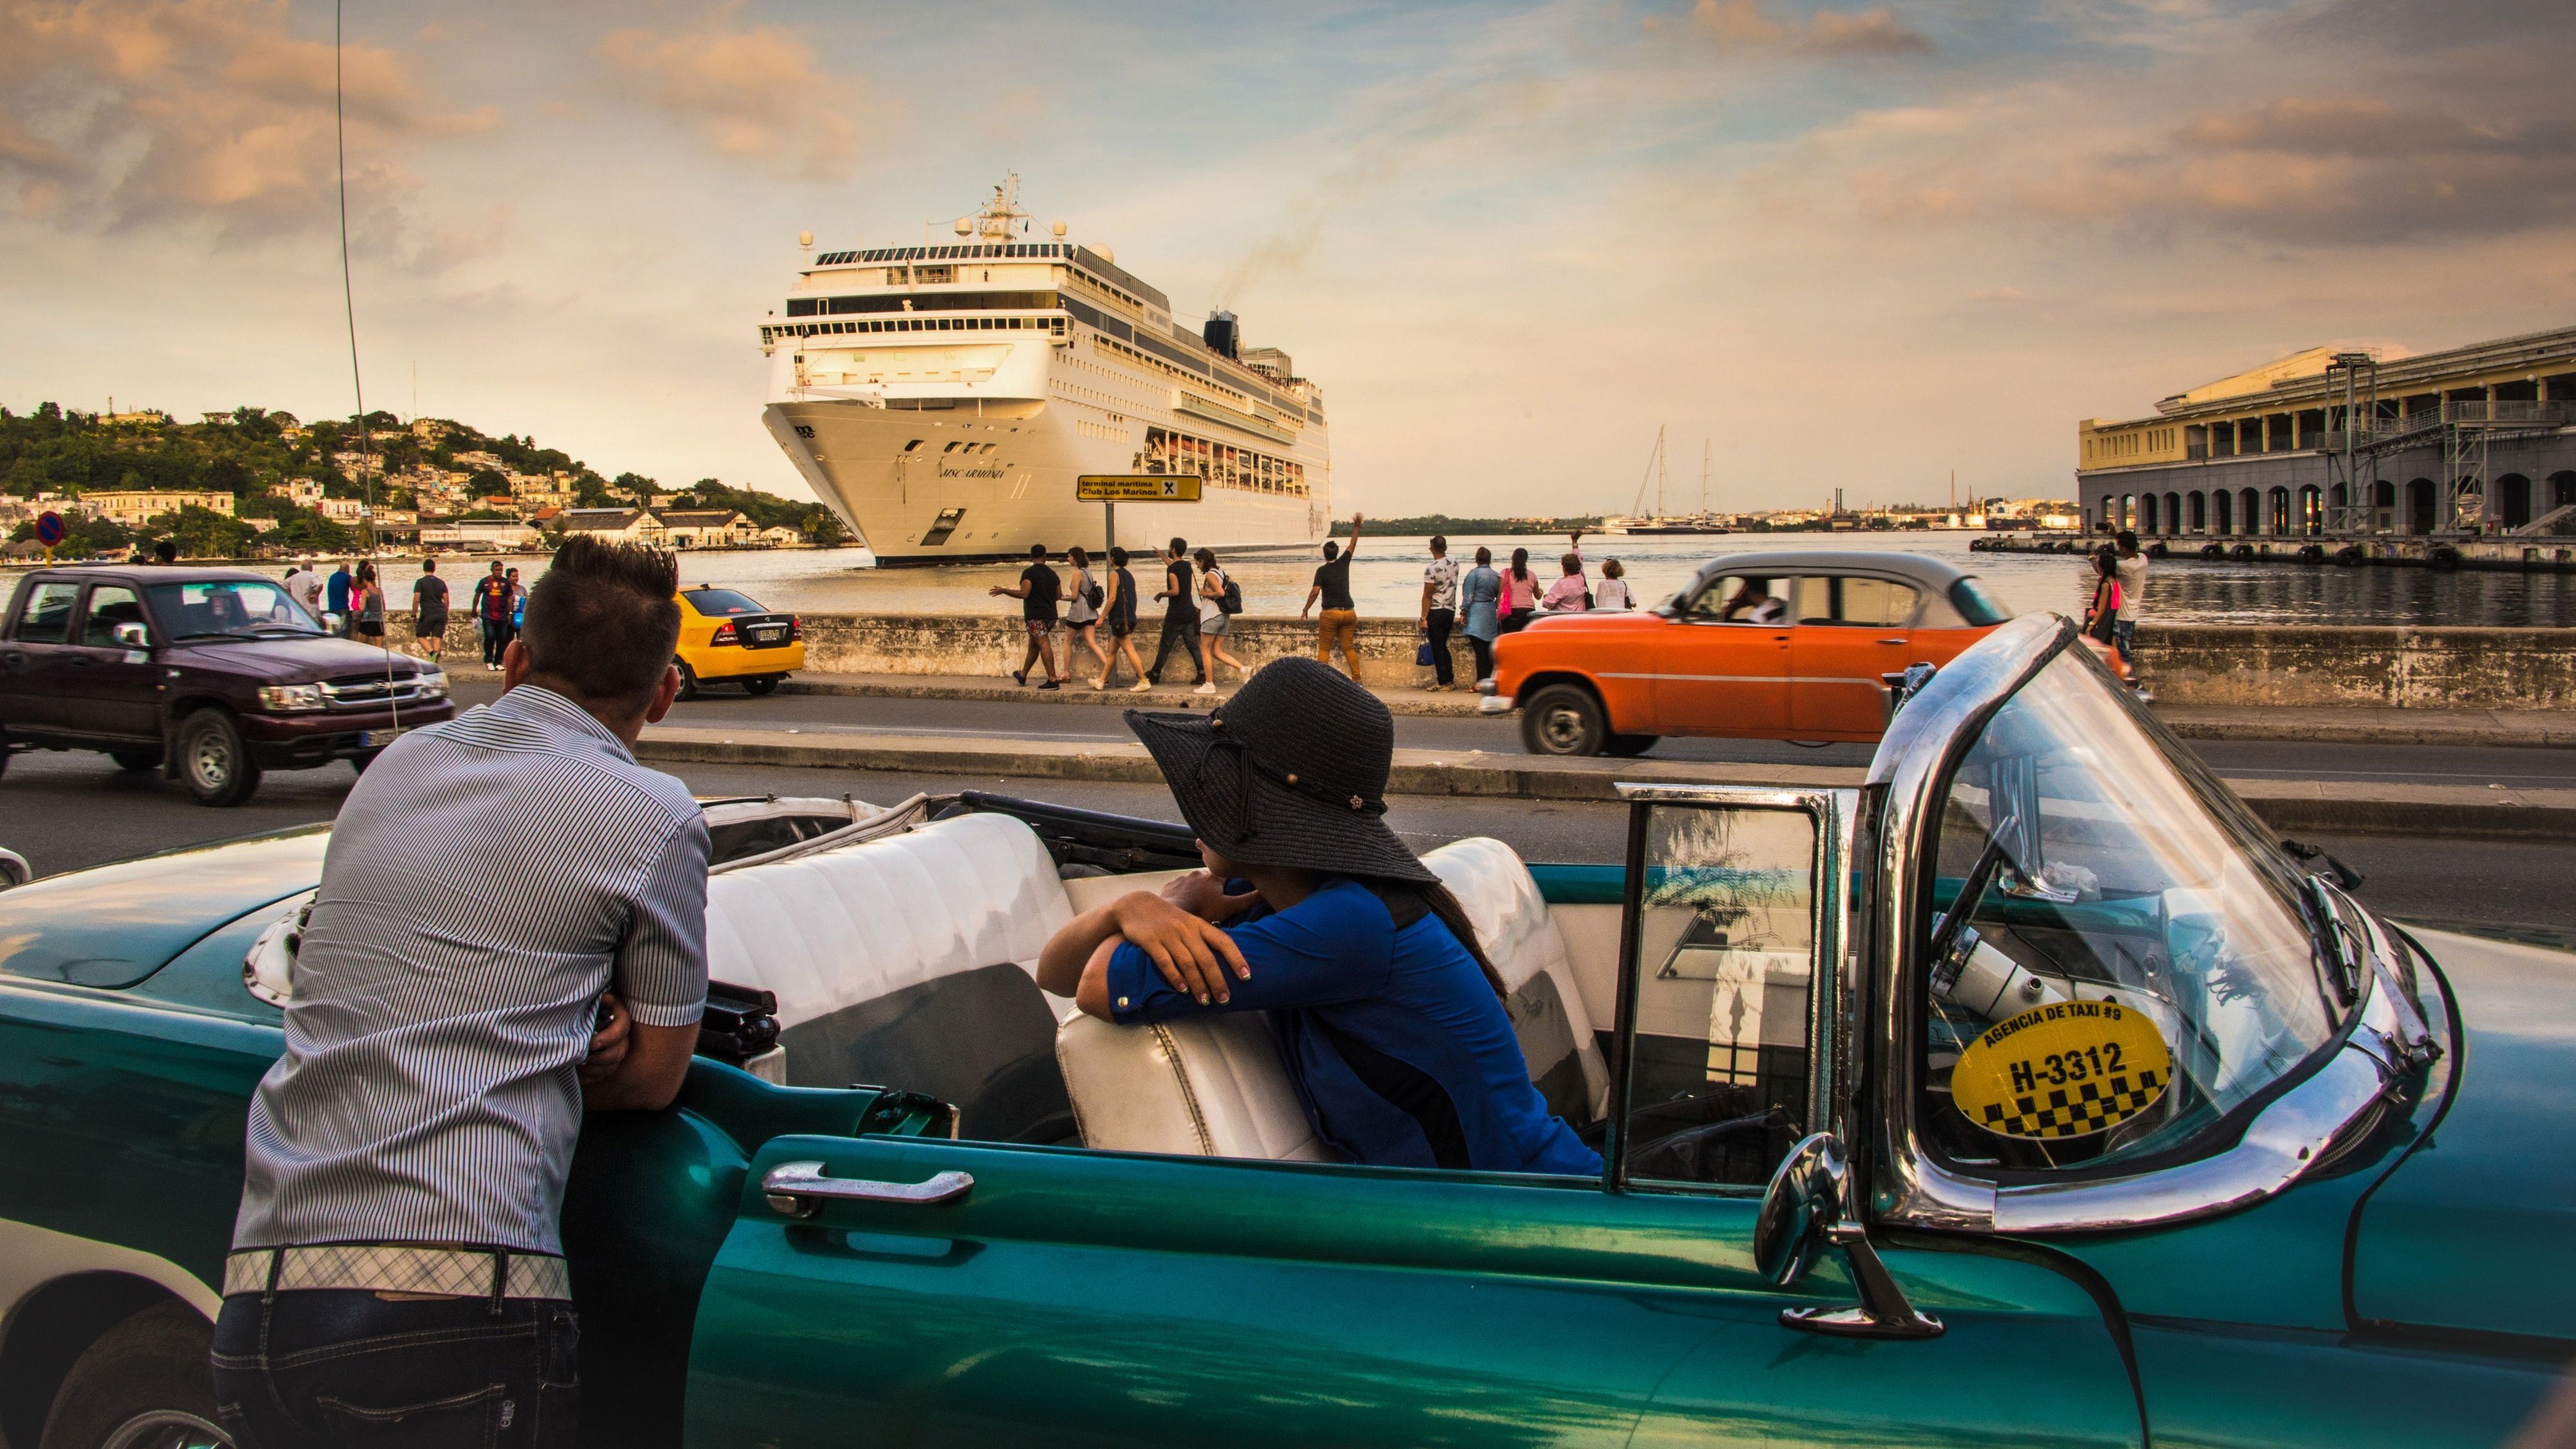 Cuba cruise ban causes confusion and uncertainty among travelers